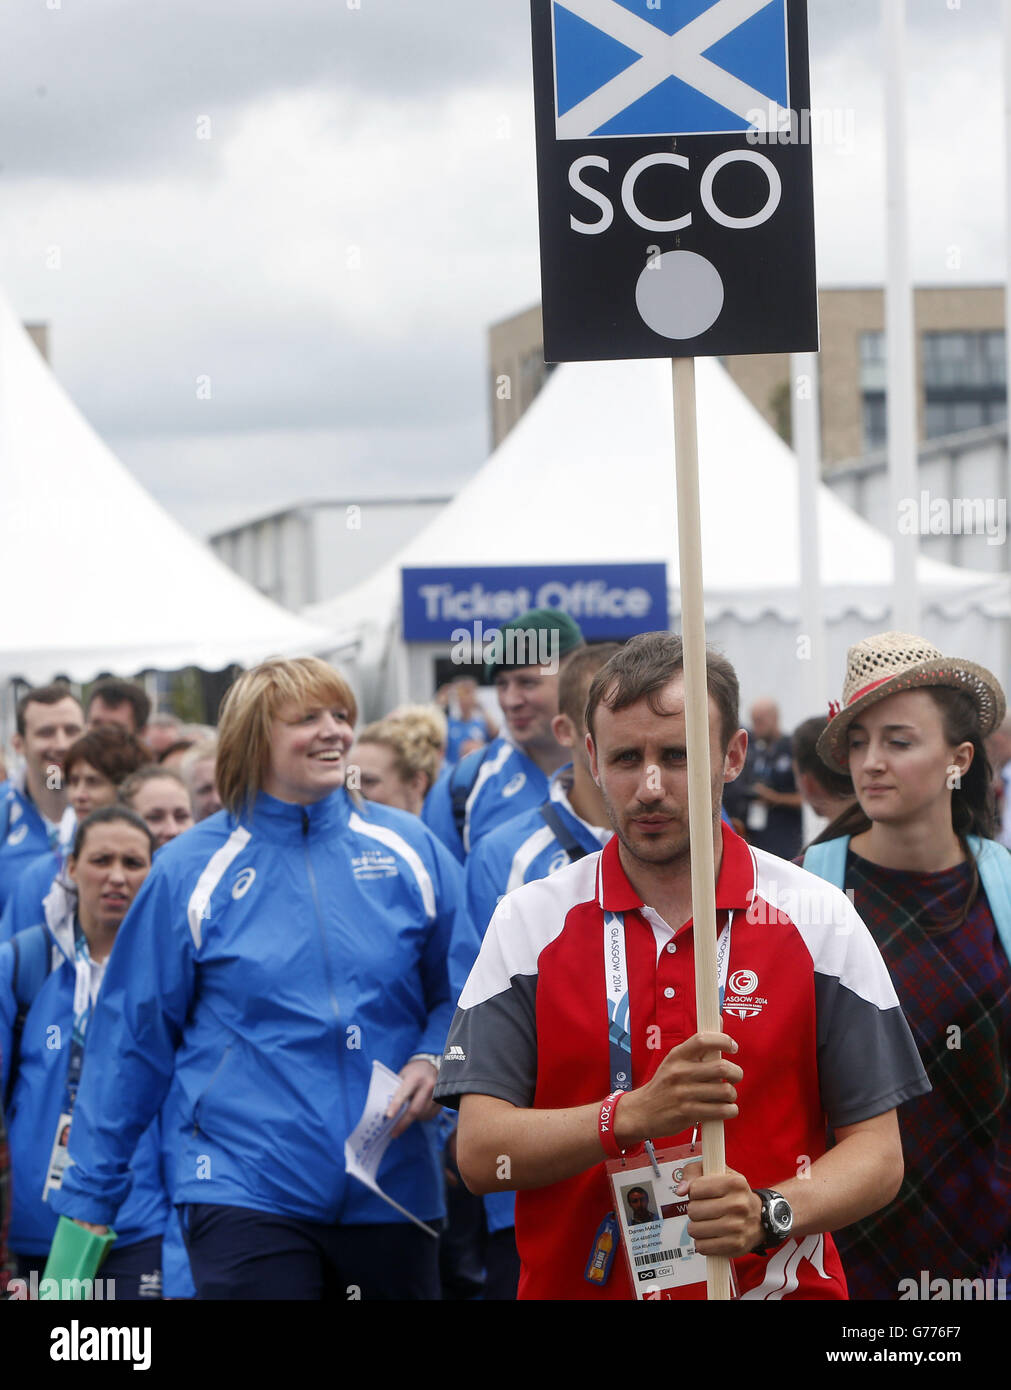 Members of team Scotland during the Team Scotland welcome ceremony at the Glasgow 2014 Commonwealth Games Athletes' Village in Glasgow, Scotland. Stock Photo